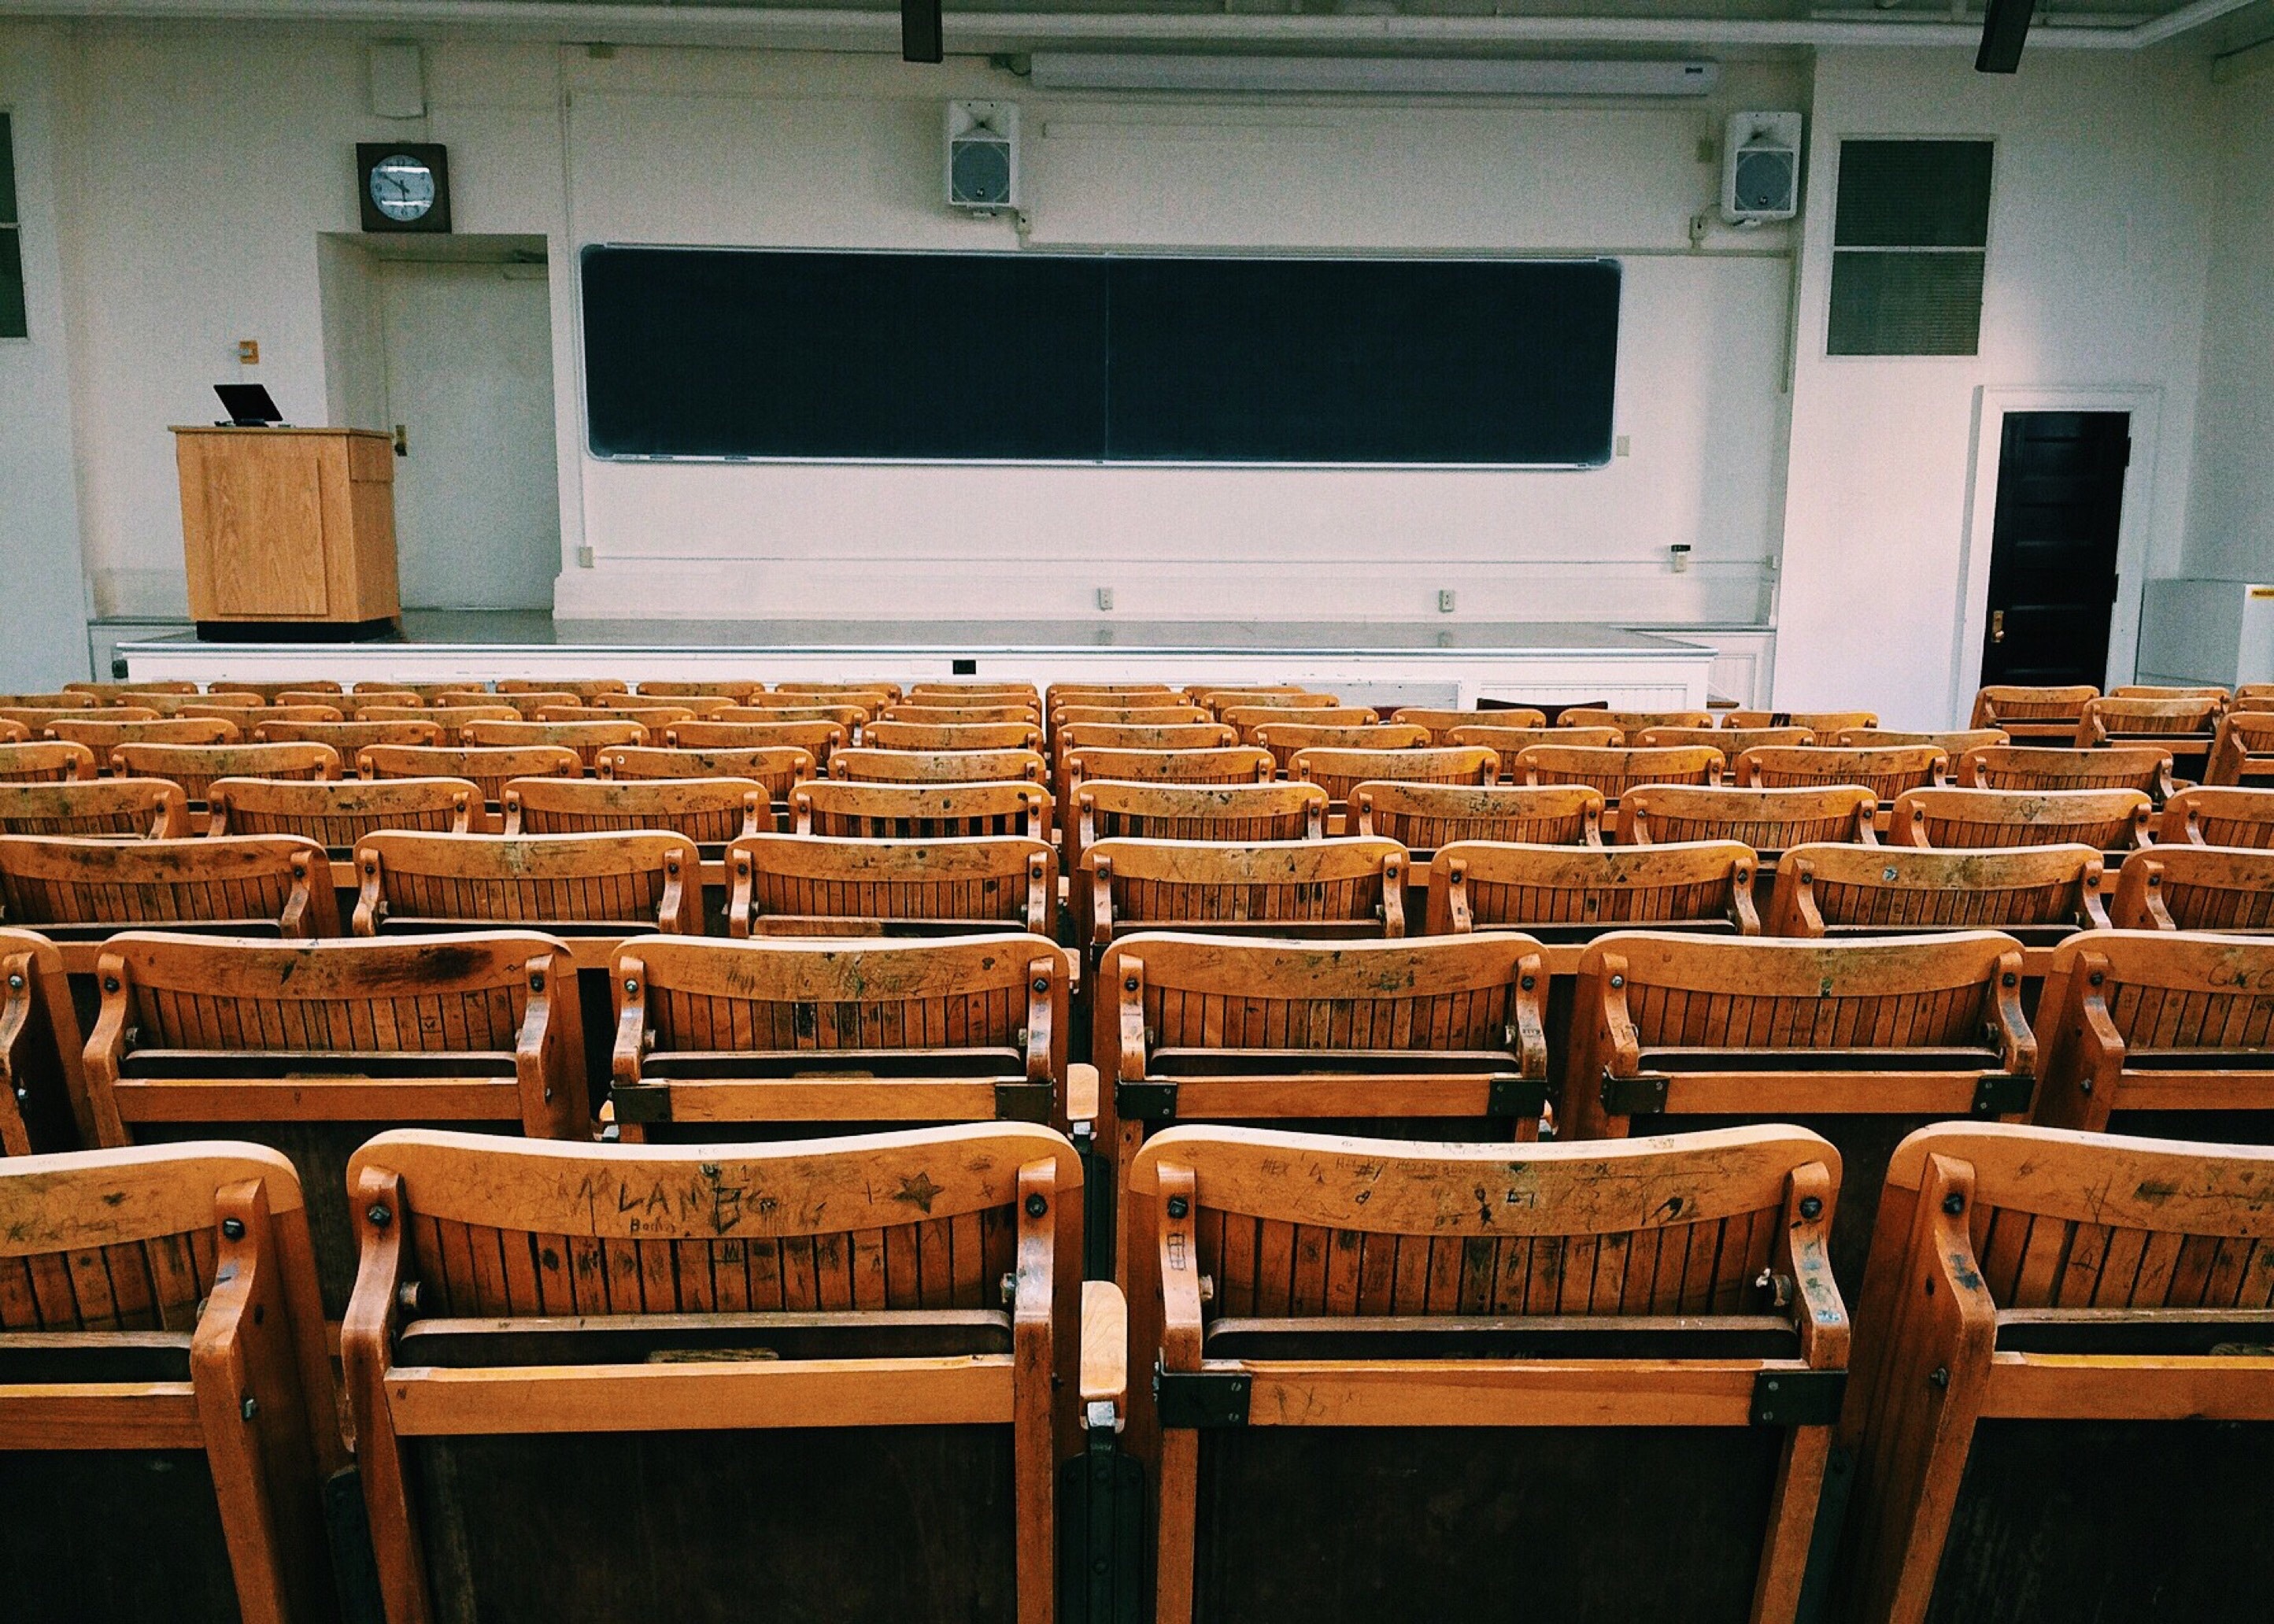 Empty lecture hall with wooden seats.